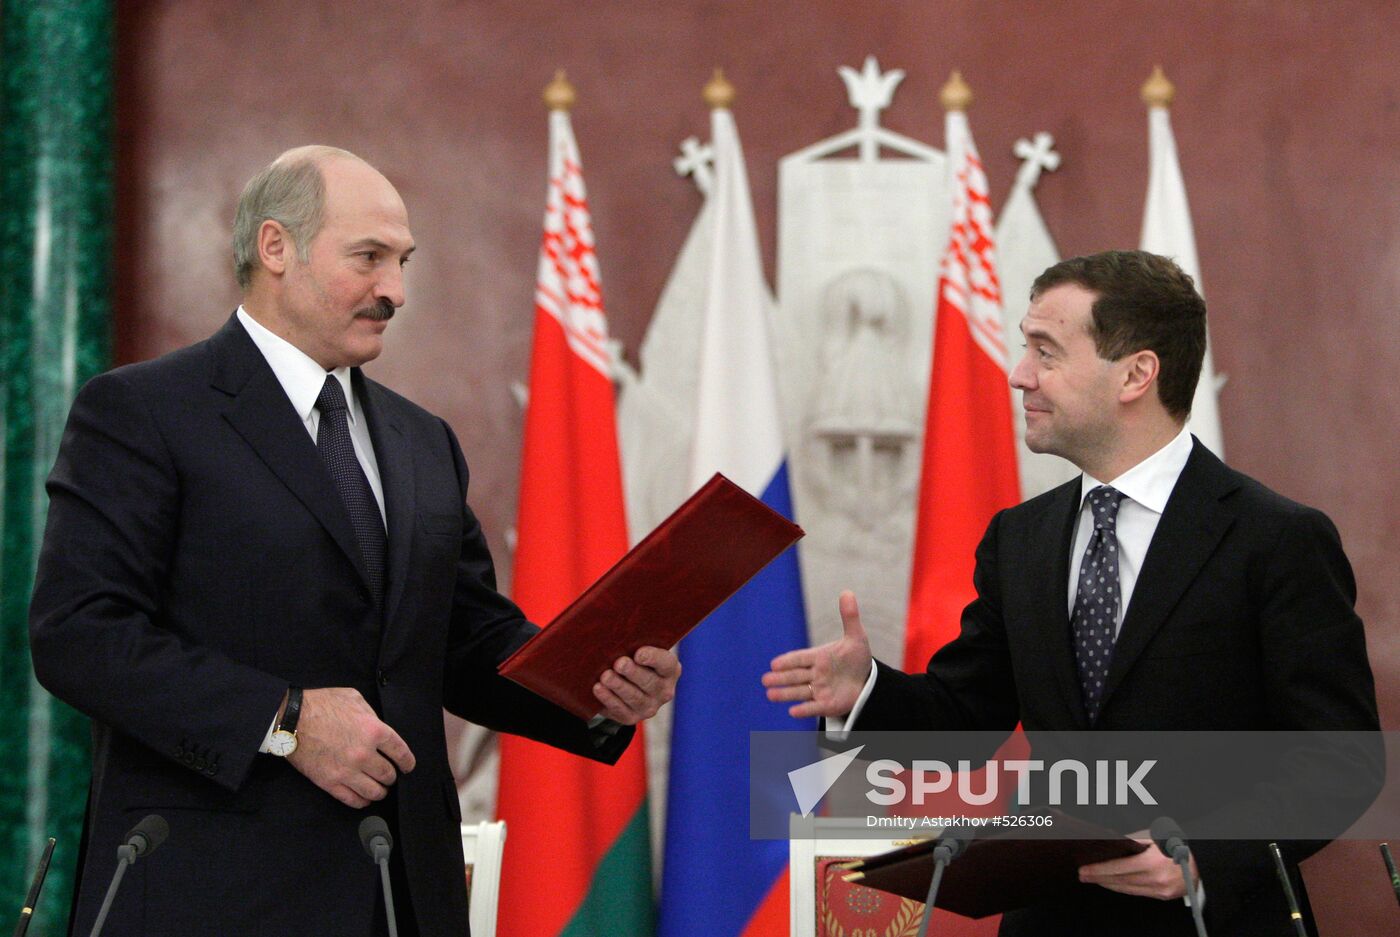 Presidents of Russia and Belarus sign Declaration